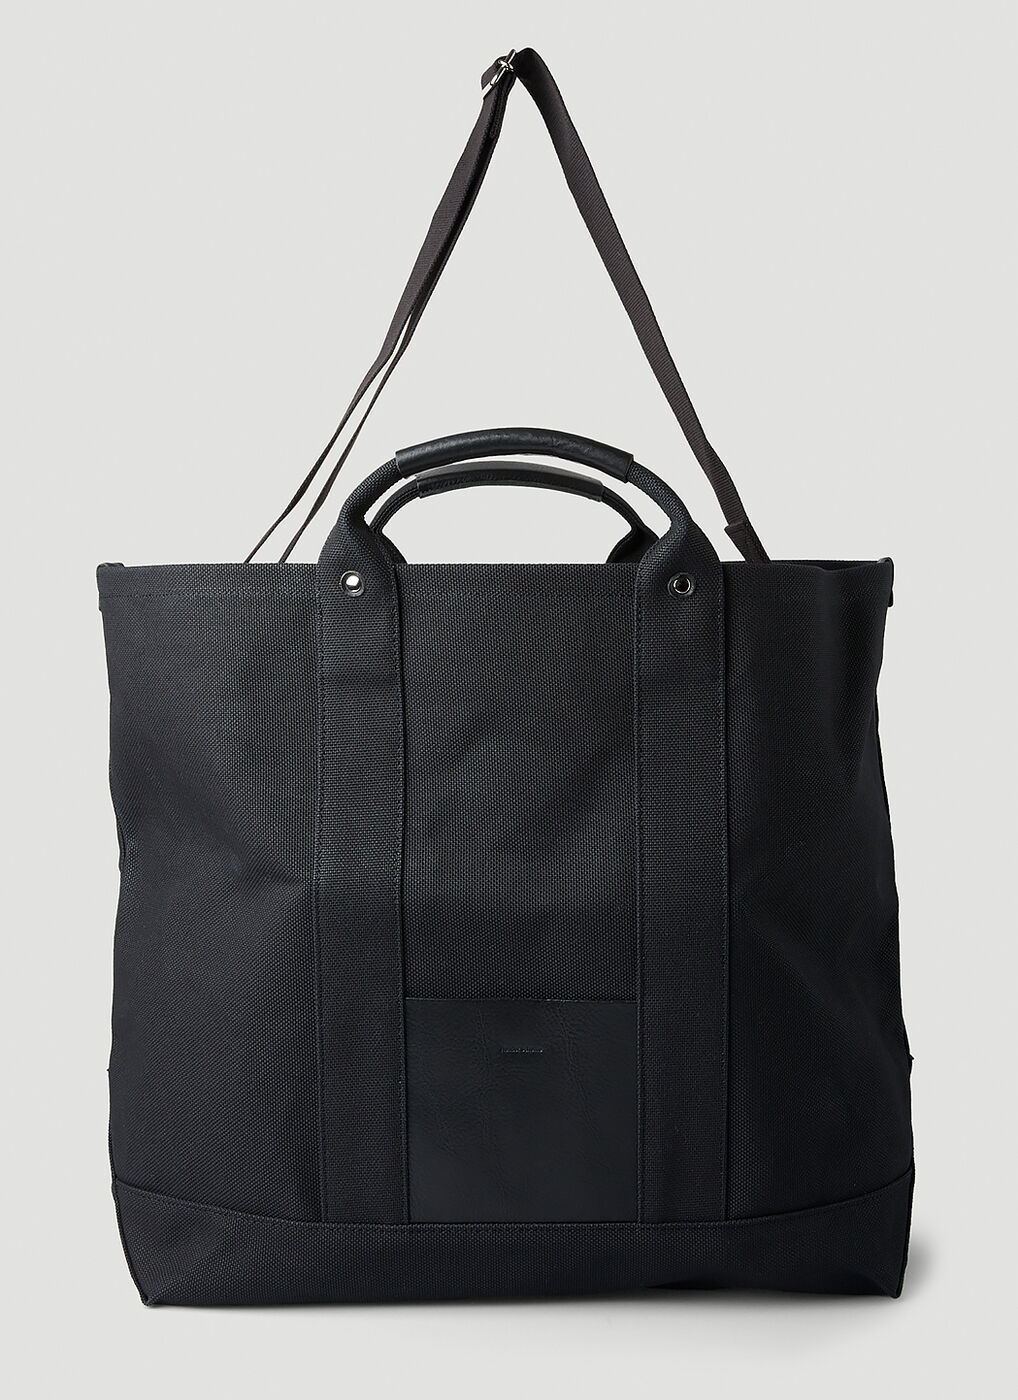 Womens Mens Bags Mens Tote bags Hender Scheme Leather Campus Small Tote Bag in Black 